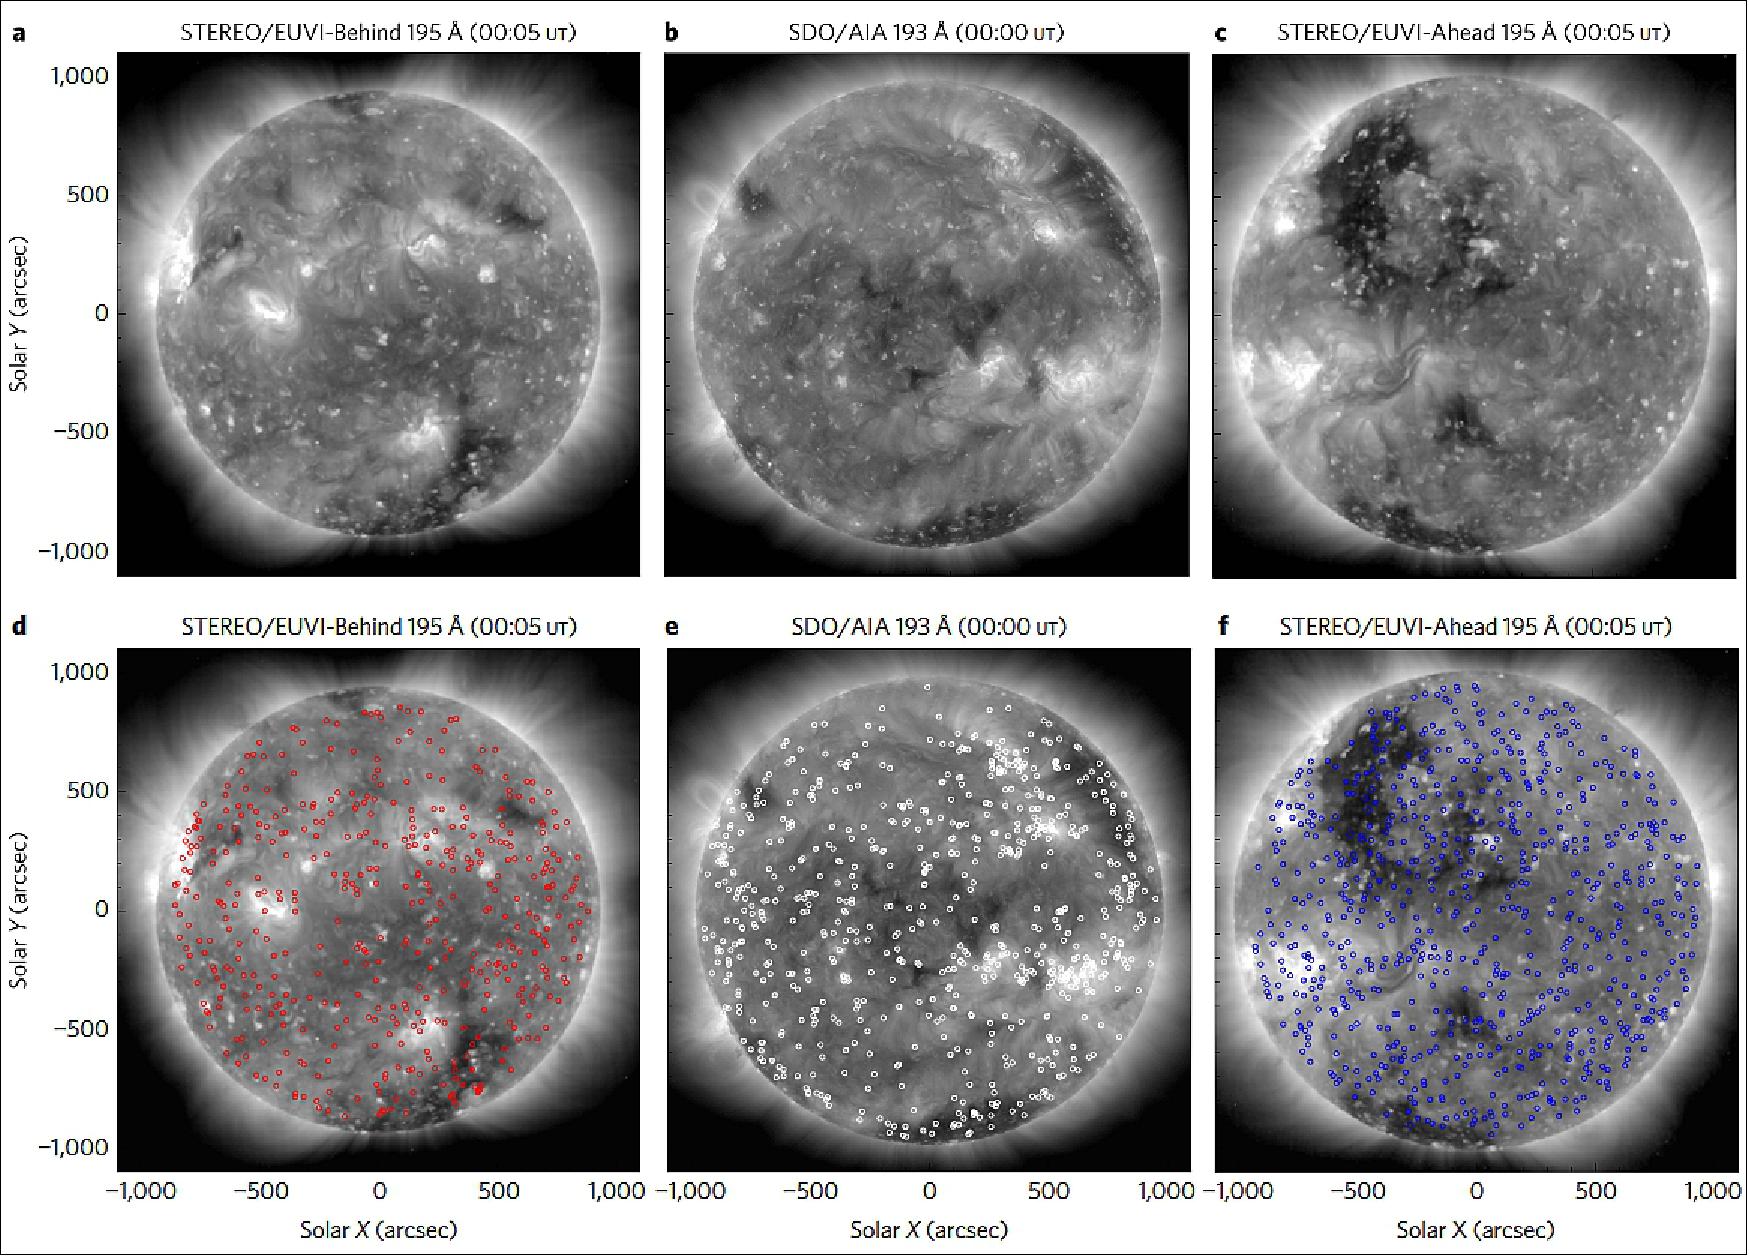 Figure 26: Coronal BP (Bright Point) detection at three distinct vantage points in space. BP detections by the STEREO and SDO spacecraft taken around 00:00 UT on 2 February 2011, when the entire solar corona could first be seen by all three spacecraft. The top row (a-c) shows coronal images from a plasma formed around 1.5 MK. The small bright concentrations seen in these images are BPs. The bottom row (d-f) shows the same images with respective BP directions shown in red (STEREO Behind), white (SDO) and blue (STEREO Ahead), image credit: Scott McIntosh, and the Rossby wave study team)